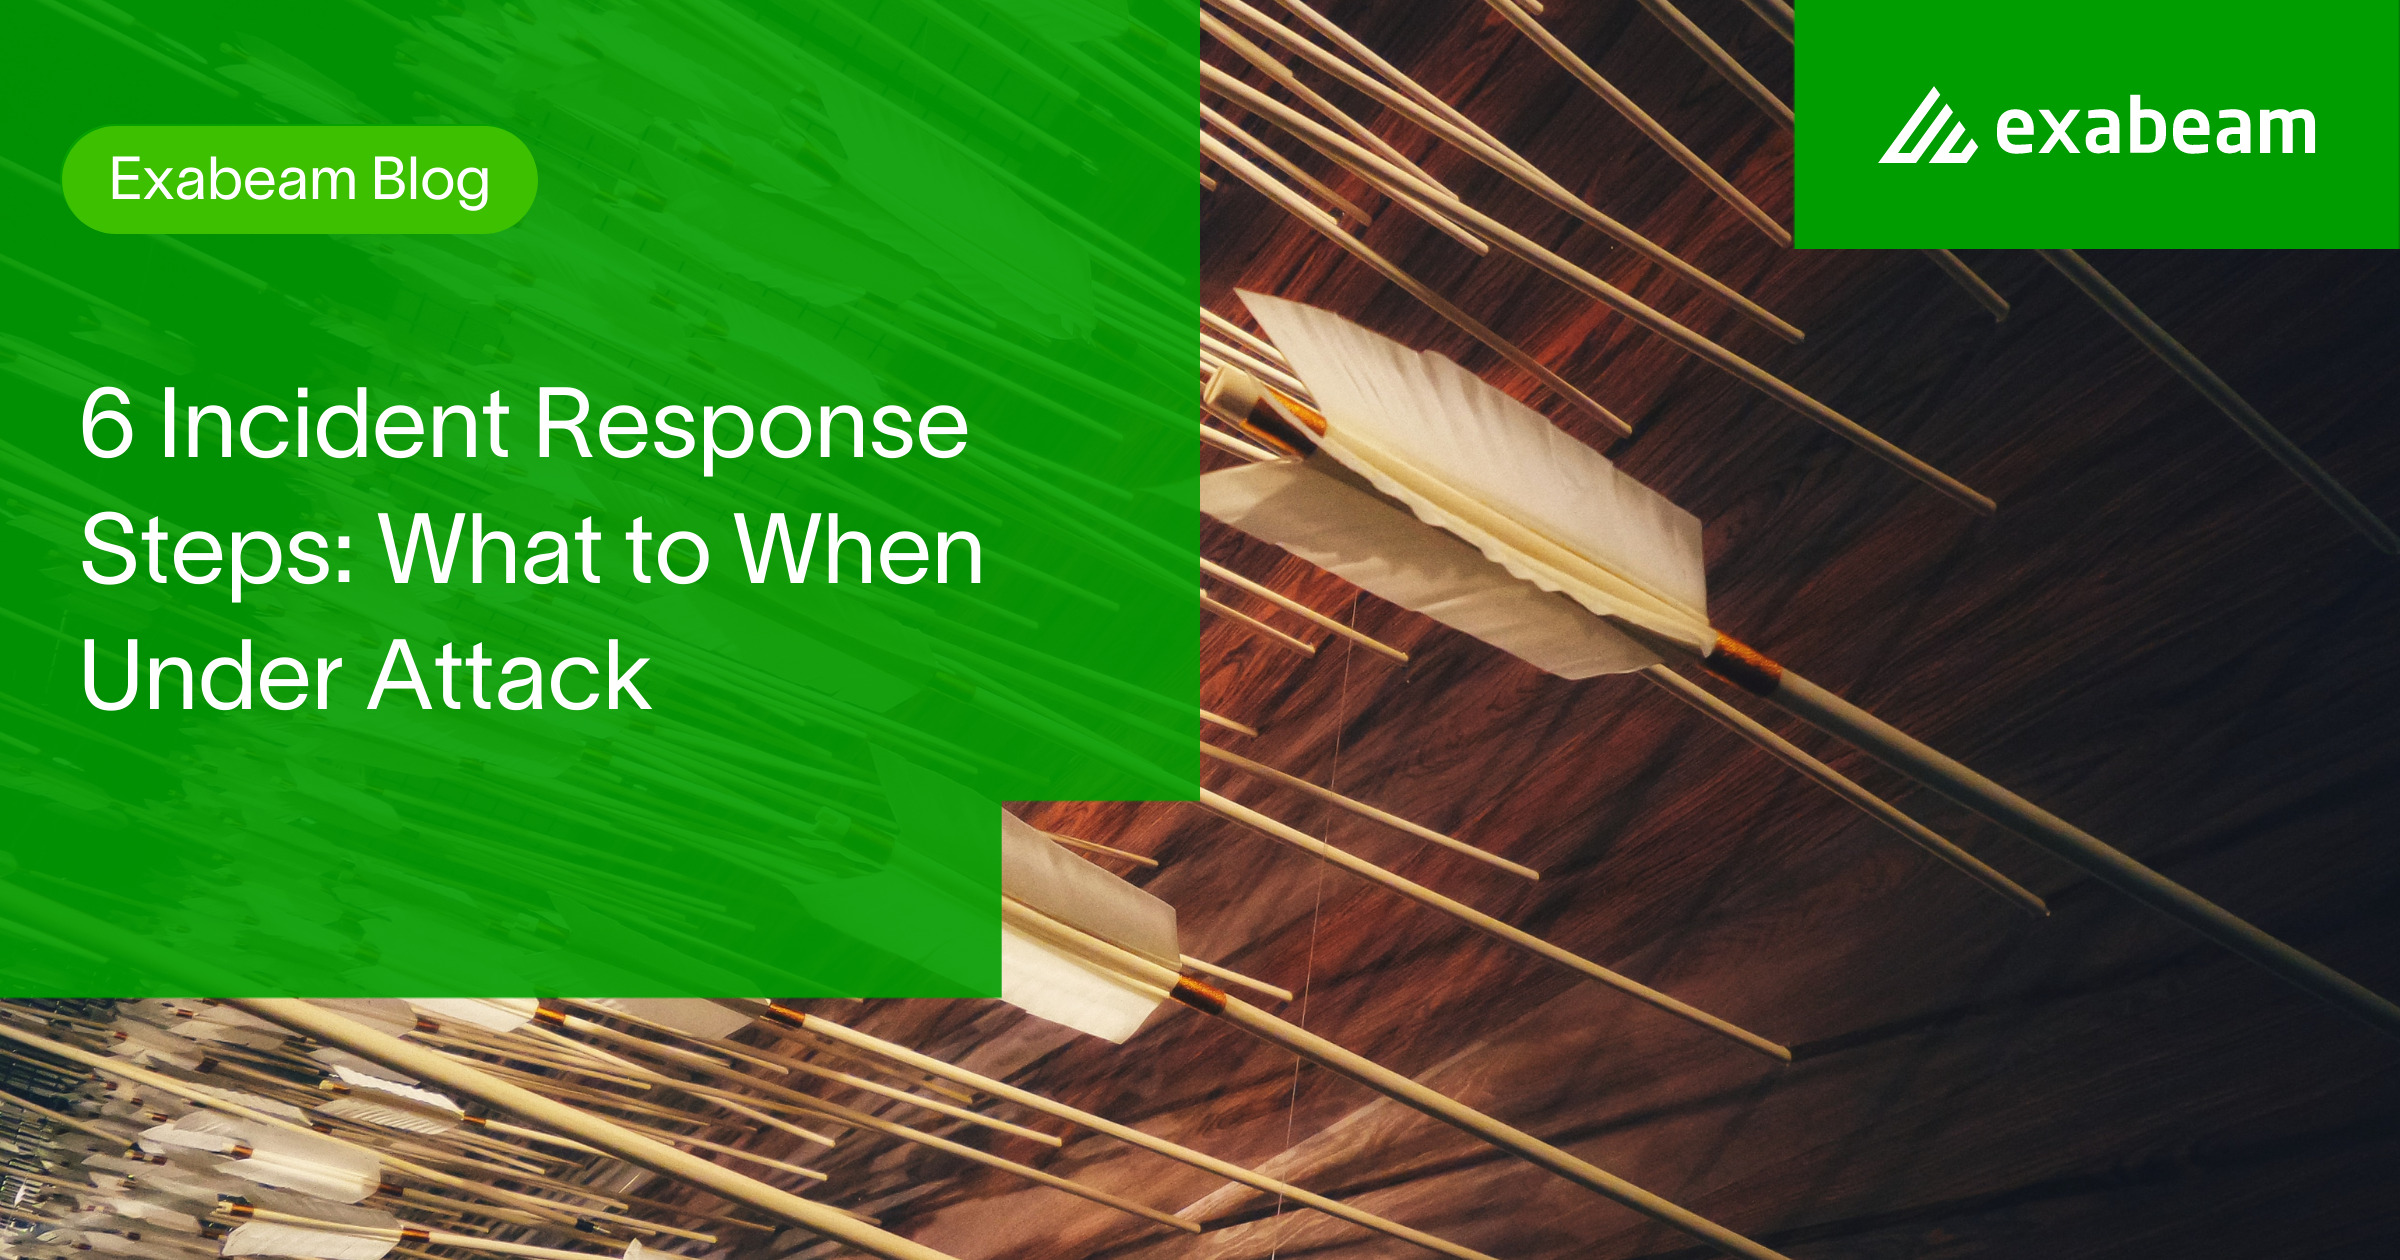 6 Incident Response Steps: What to When Under Attack